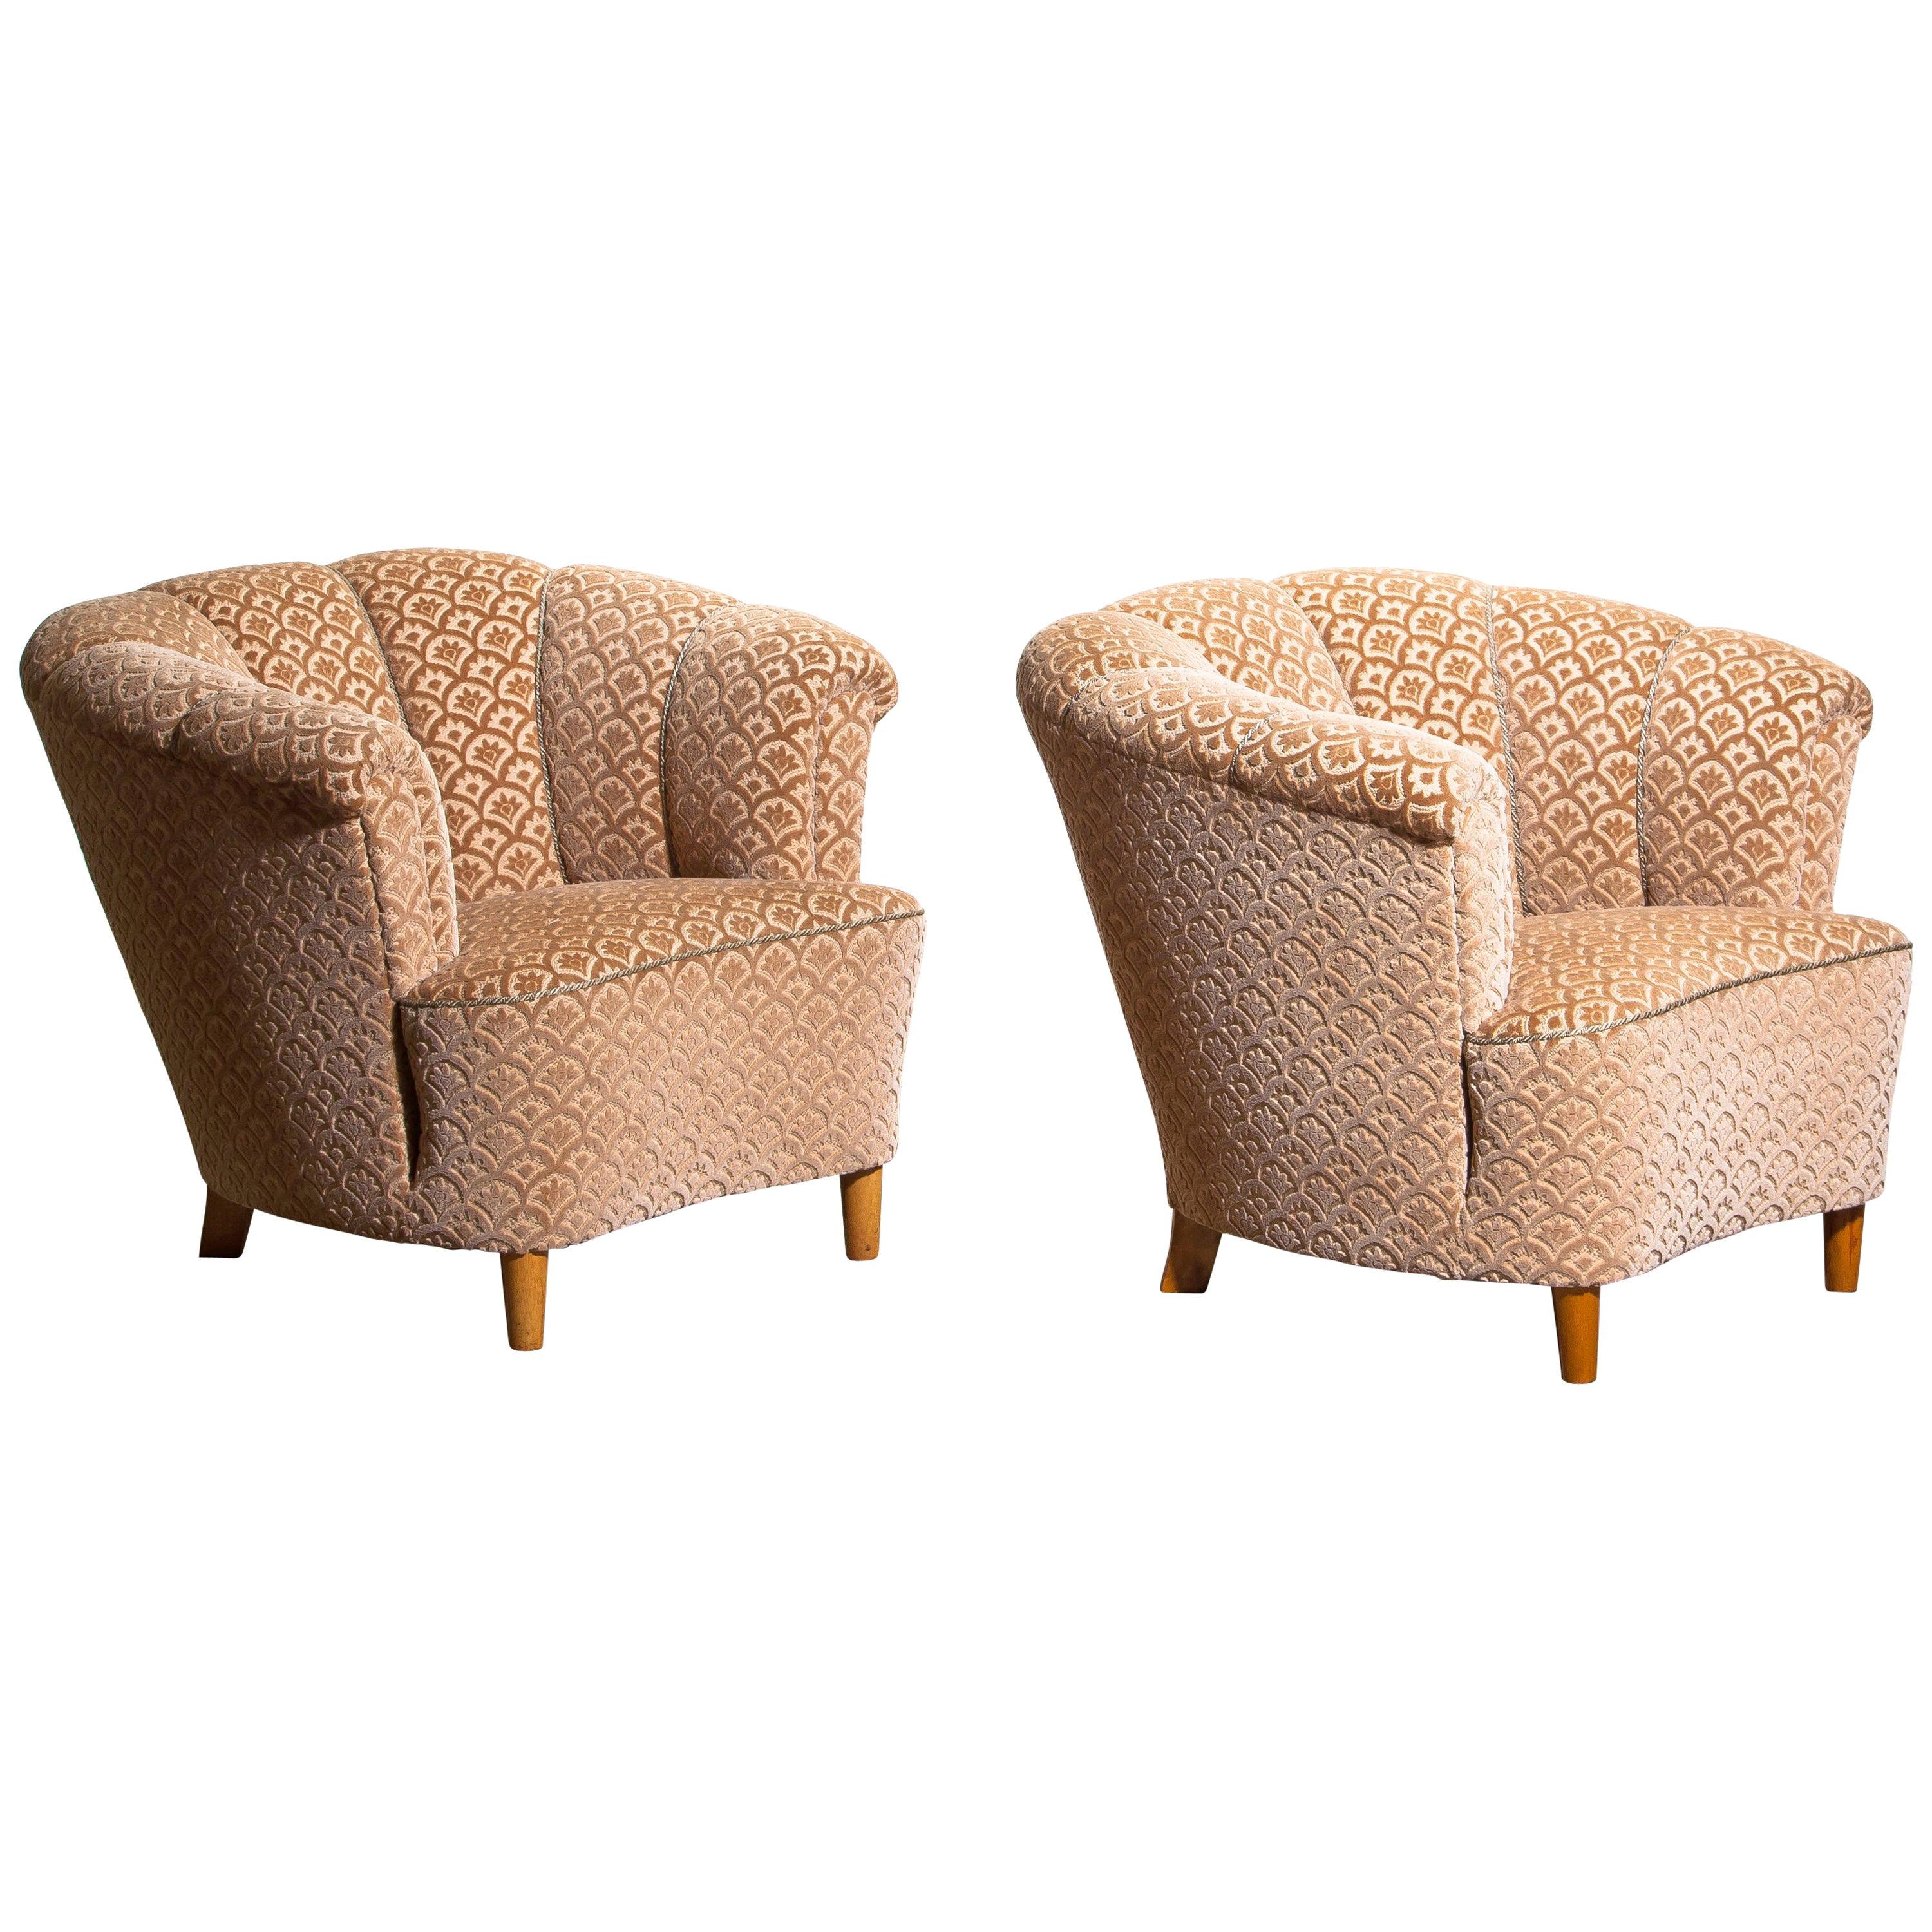 1940s, Pair of Shell Back Club Lounge Cocktail Chairs from Sweden